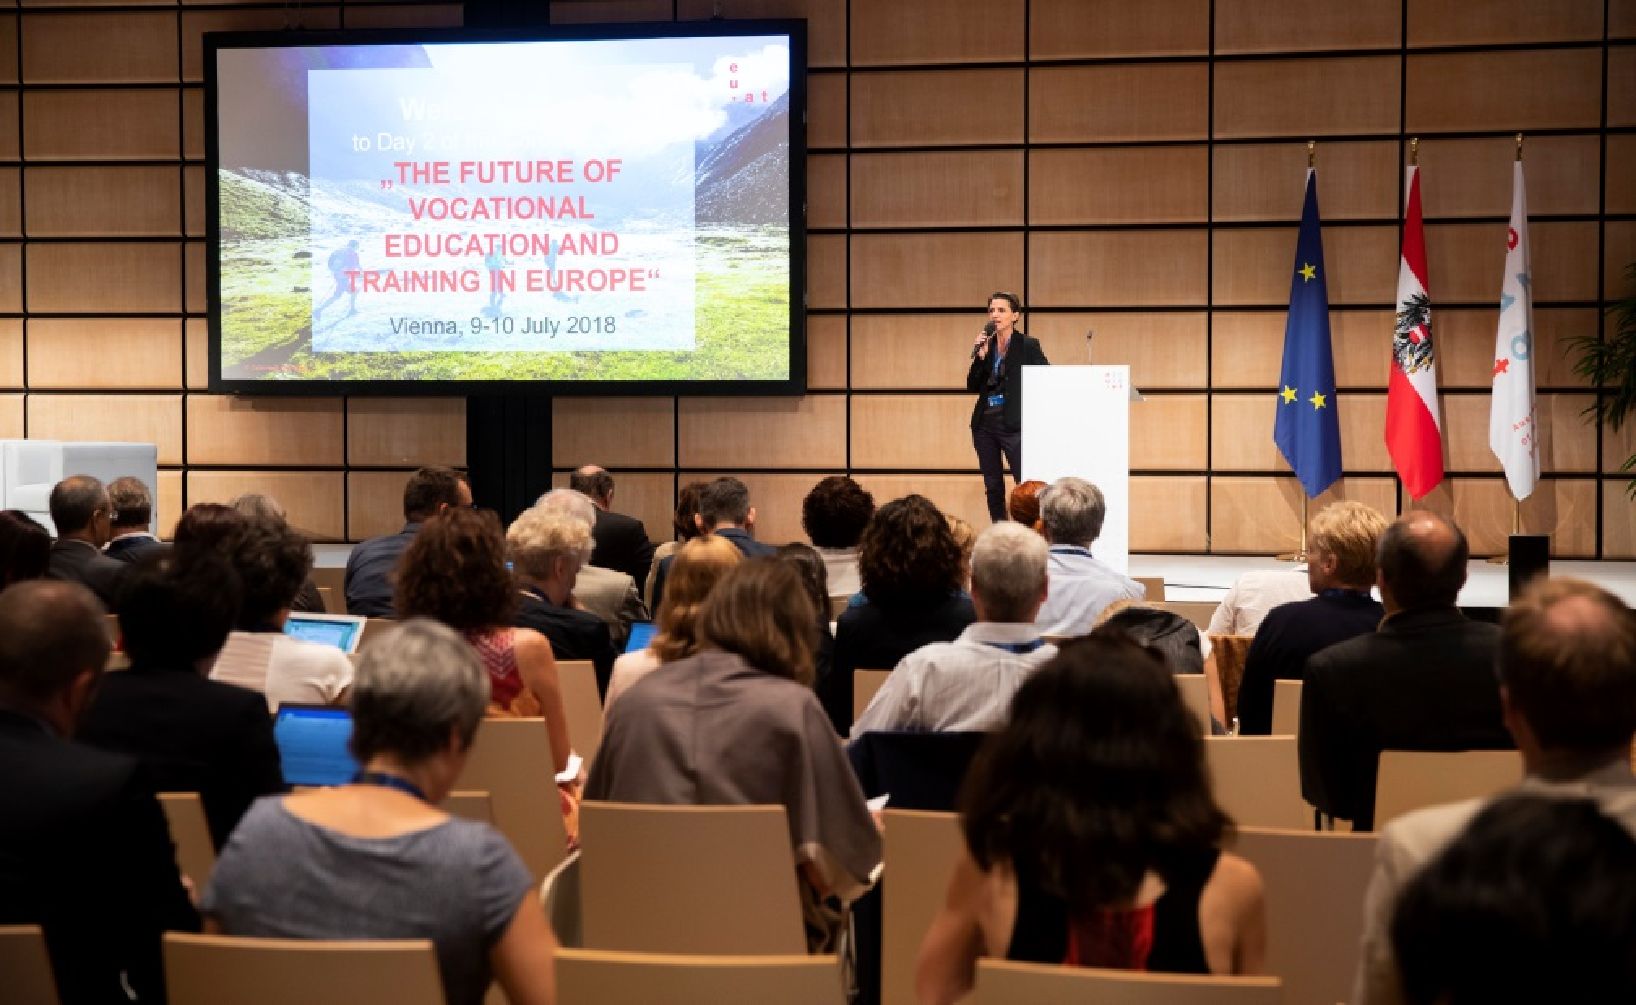 Conference “The Future of Vocational Education and Training in Europe” (9-10 July 2018)